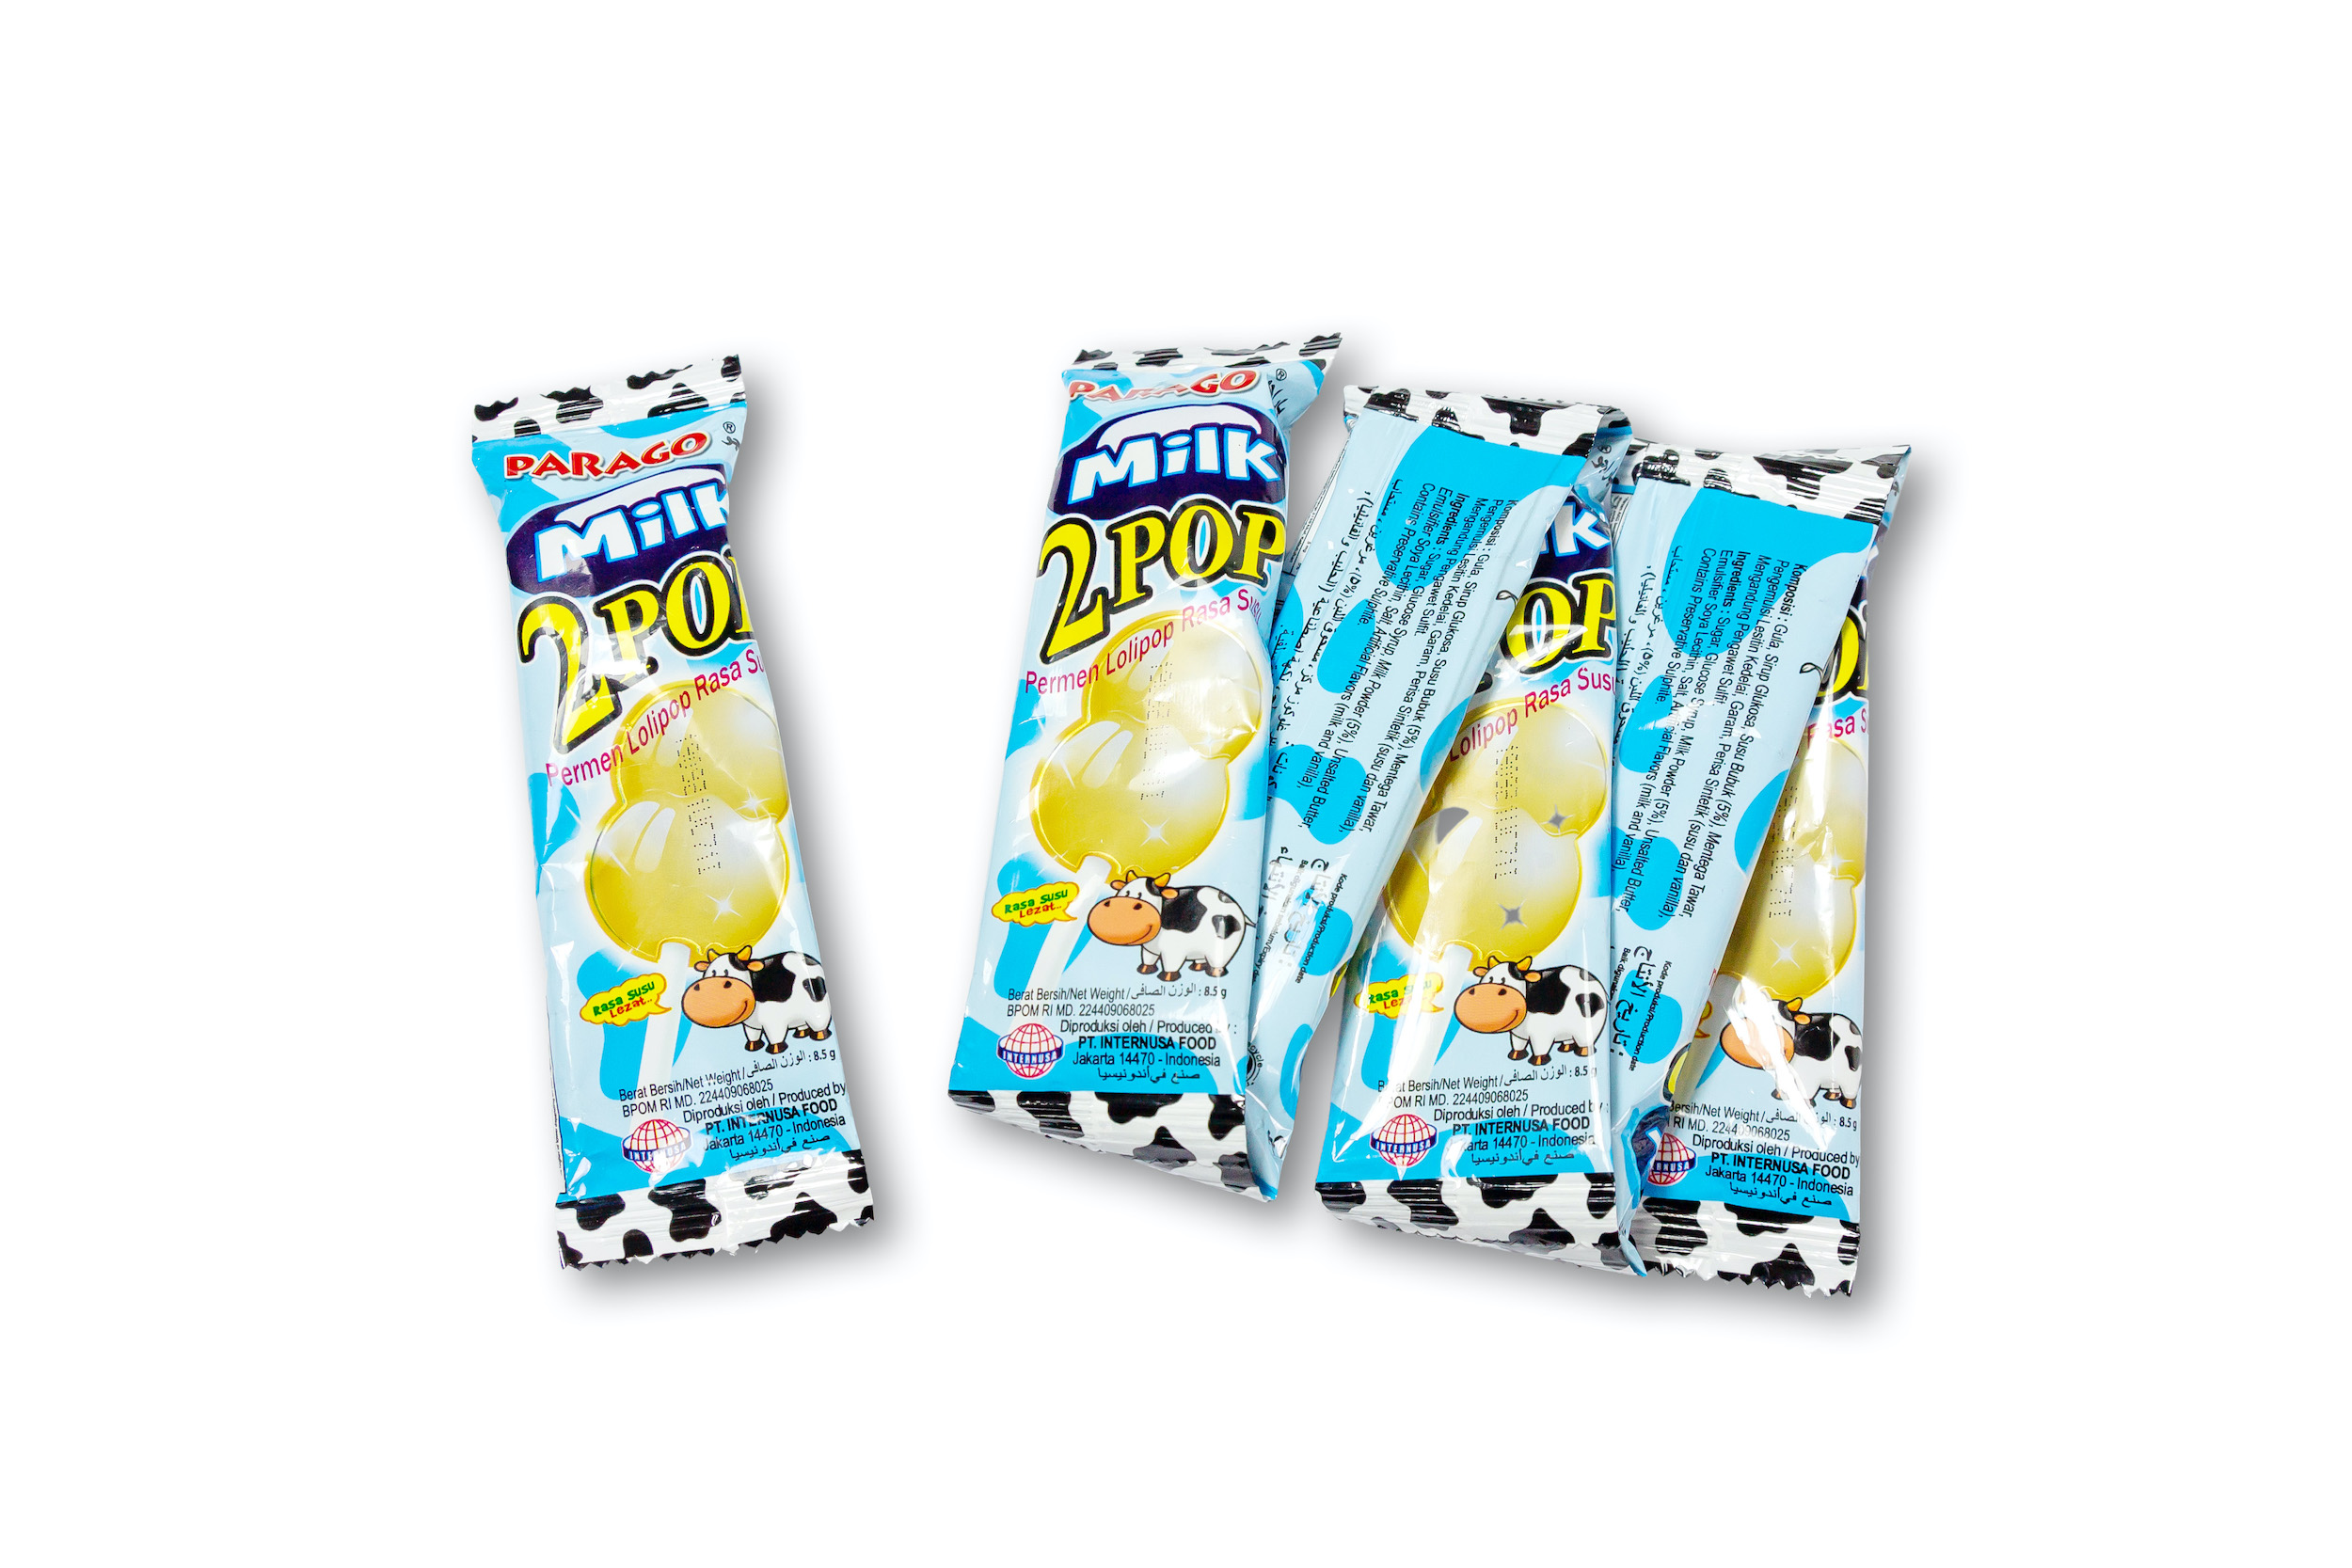 Created with our own factory-made condense milk and a hint of vanilla essence, Parago Milk 2 Pop has a smooth texture with a deep and intense creamy flavour. Not only is it rich in calcium, it is also a delicious, refreshing, and delightful lolly to share with your friends, colleagues or guests. As it is individually wrapped, you can easily store them in your pocket, purse, lunchbox, or bag and have them with you wherever you go! The packaging comes with a little surprise, A TATOO! To get this tatoo, simply peeled-off the front side of the package. Buy more and collect all the characters we offer!